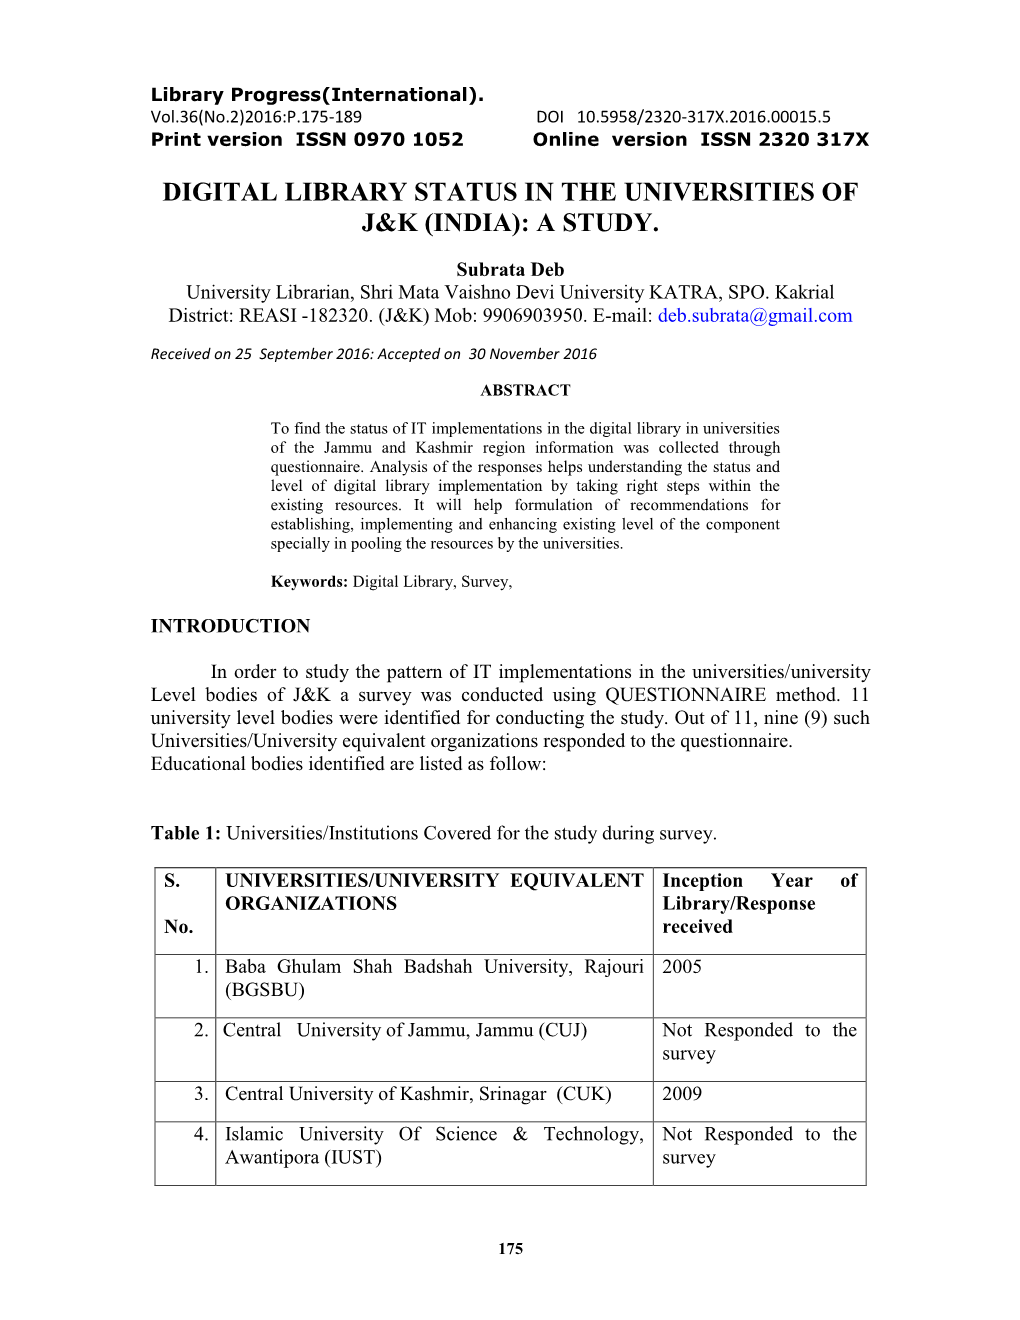 Digital Library Status in the Universities of J&K (India): a Study